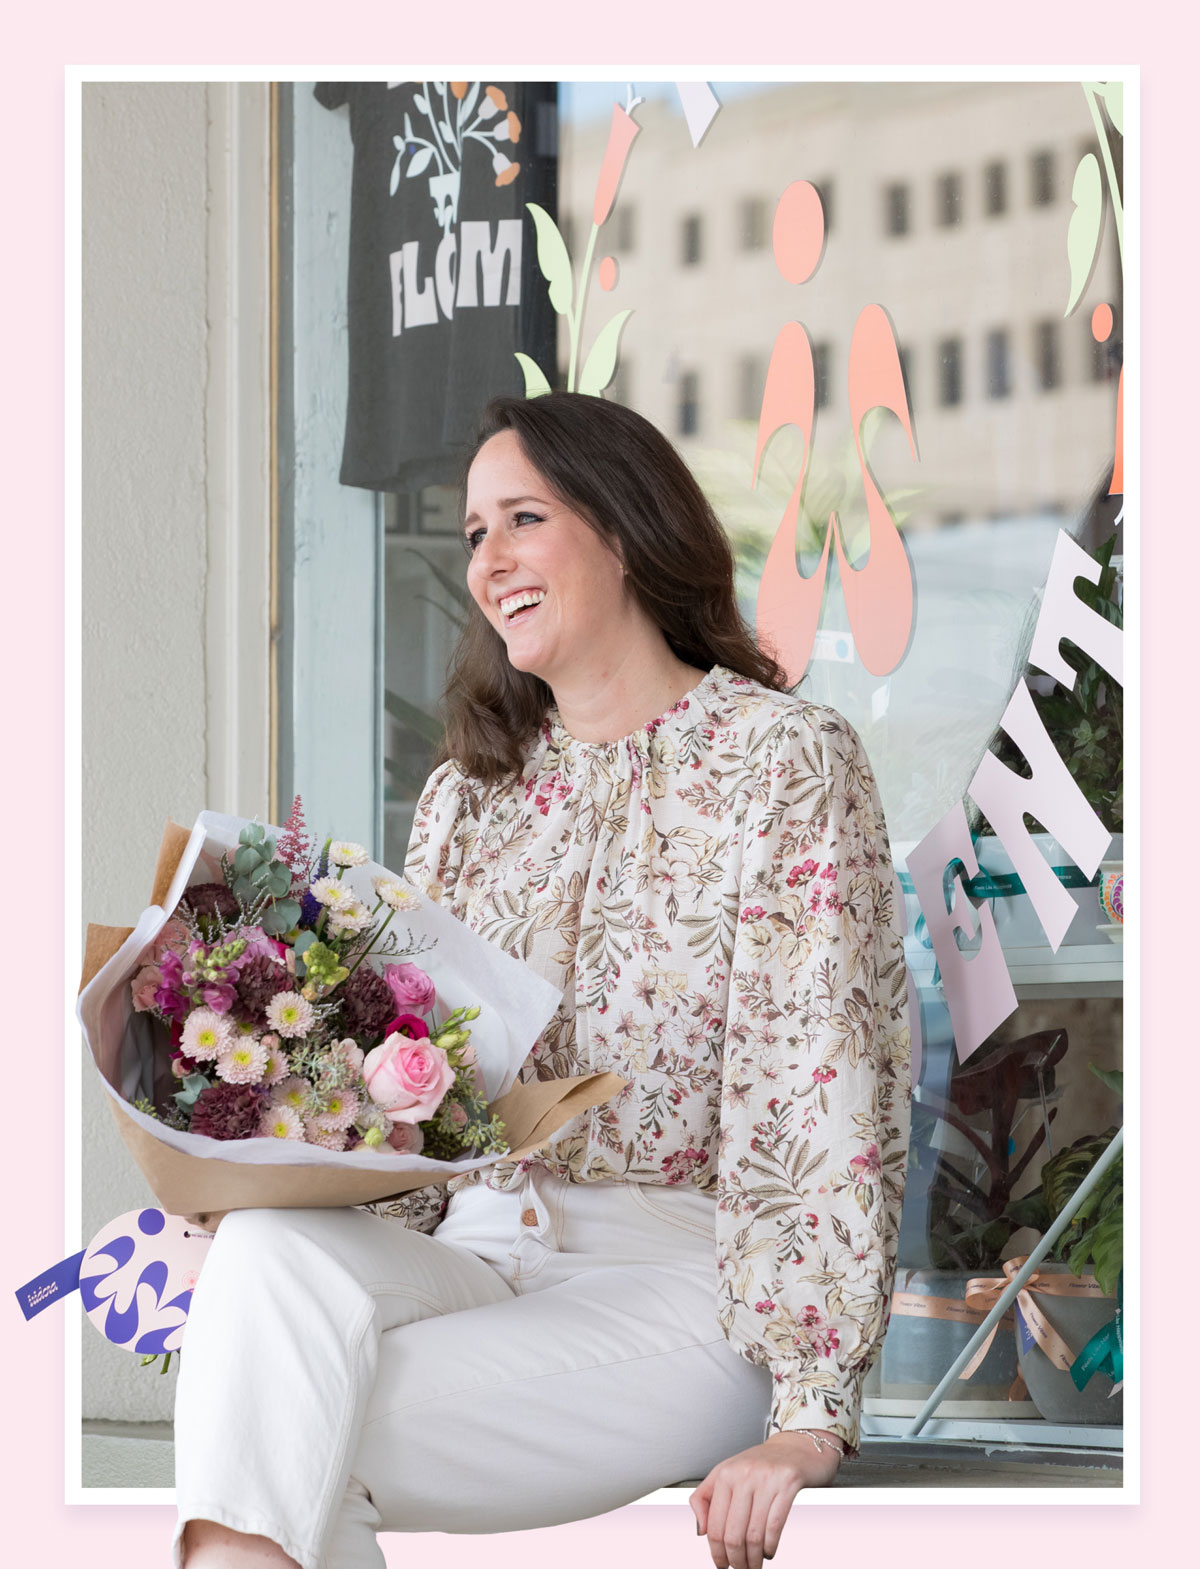 Photo: Bauer College MBA alumna and florist Thalia Jaguande holds a bouquet of flowers and smiles at her business Isidora Flower & Gift Shop in Houston's Rice Village.